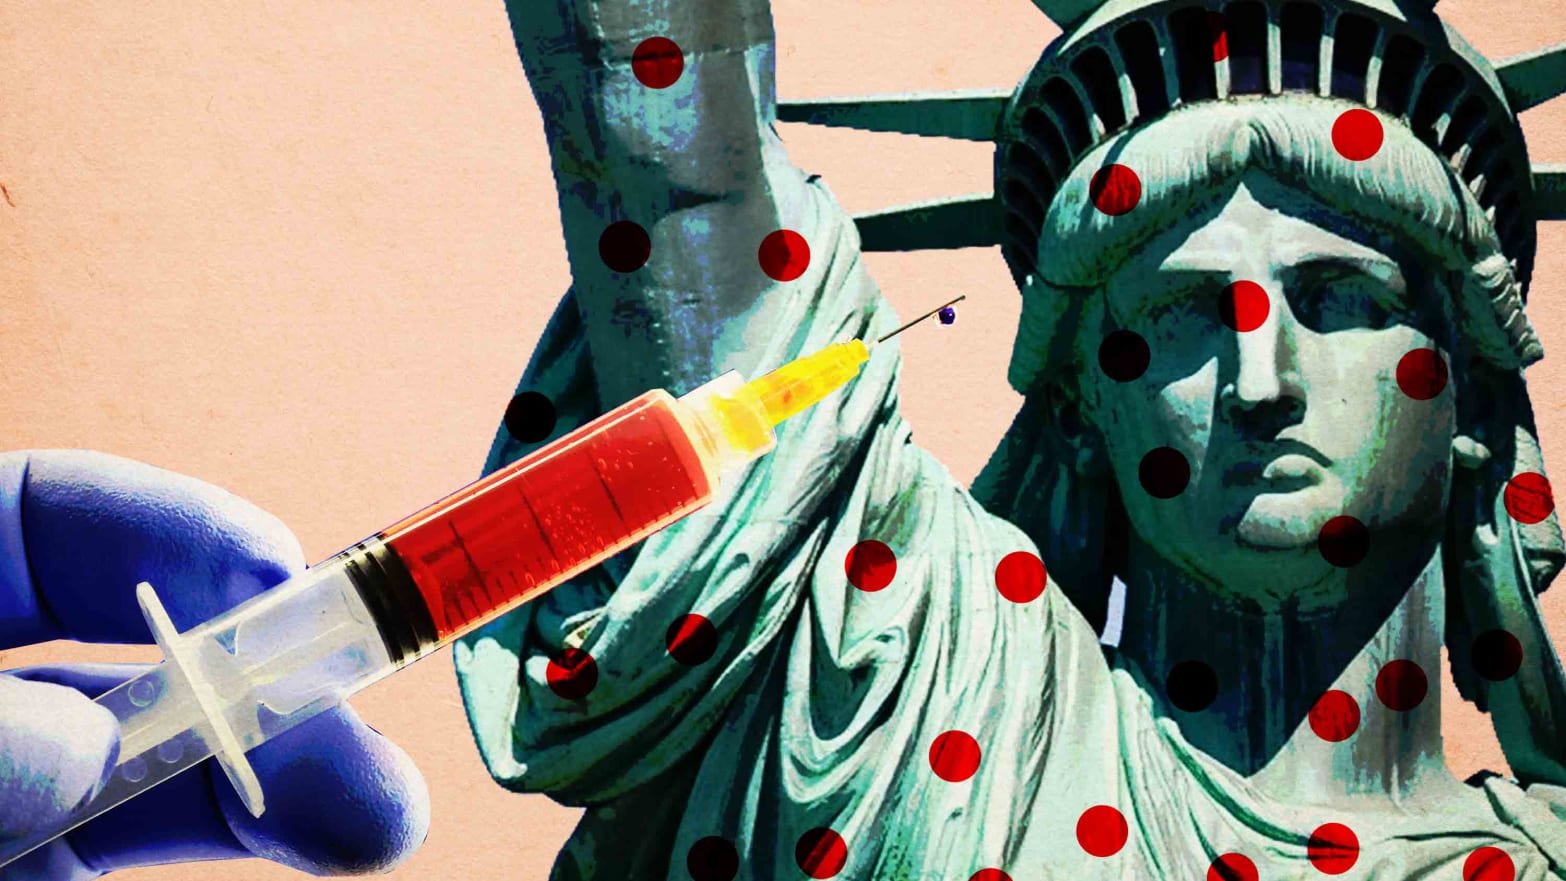 image of a blue gloved hand holding a shot vaccine carrying mmr on left and statue of liberty with red polka dots with pale millennial pink background